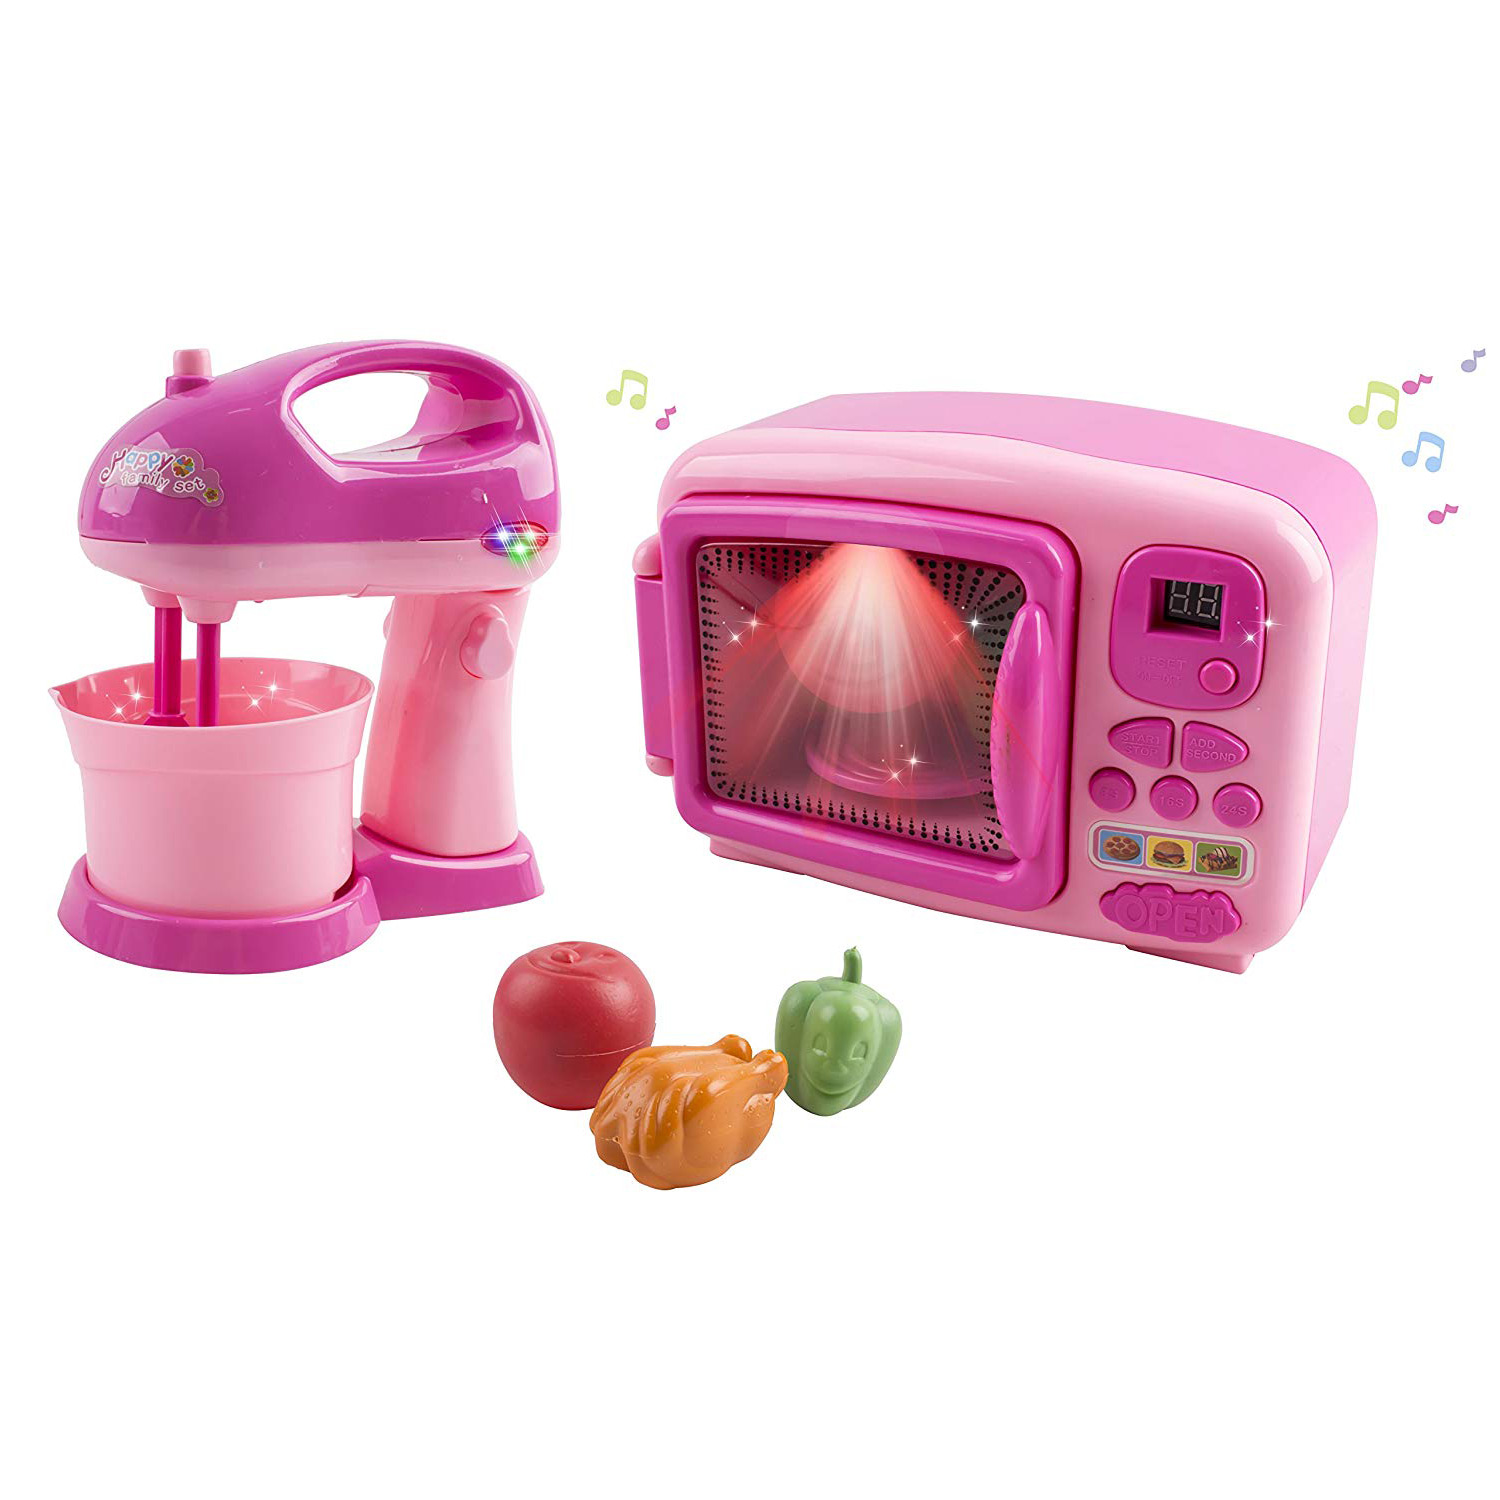 Toy Microwave and Mixing Blender Children's Kitchen Pretend Play Playset Battery Operated Appliance Set With Food Pieces Perfect For Early Learning Educational Preschool Girls Cooking Toys Pink